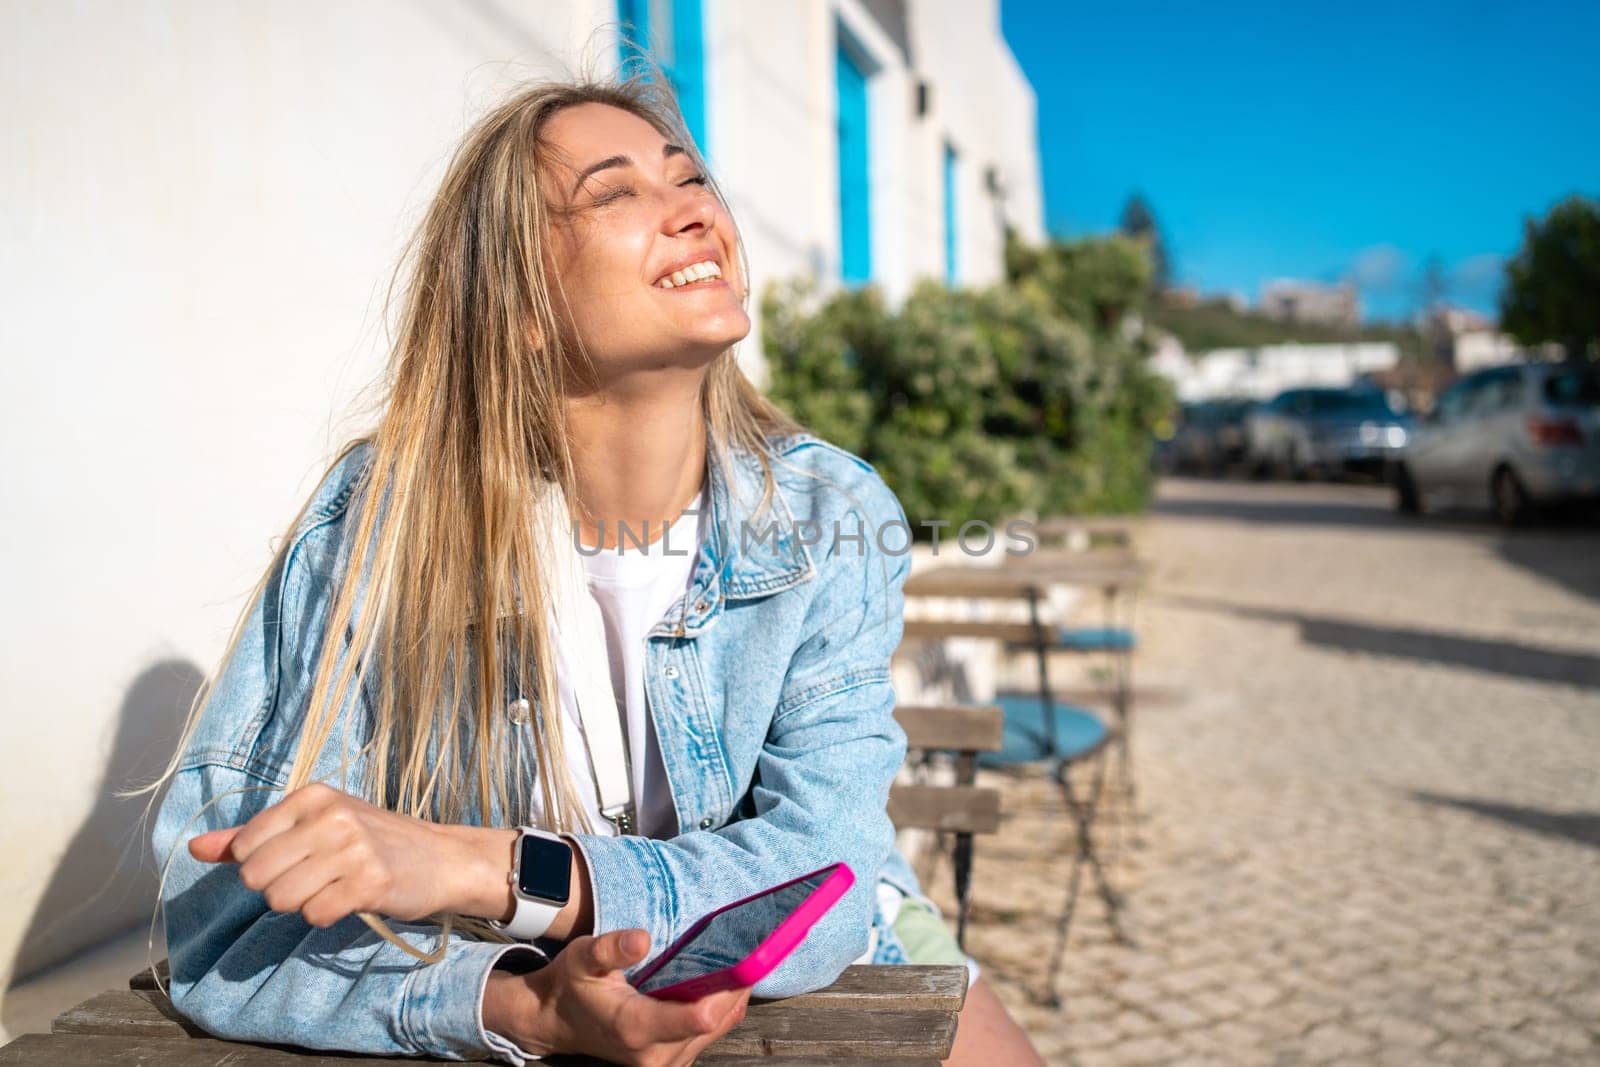 Beautiful blond woman holding smartphone at outdoor cafe table. Happy female tourist in denim shirt sitting near white building. Girl enjoys her vacation in typical Portugal city.